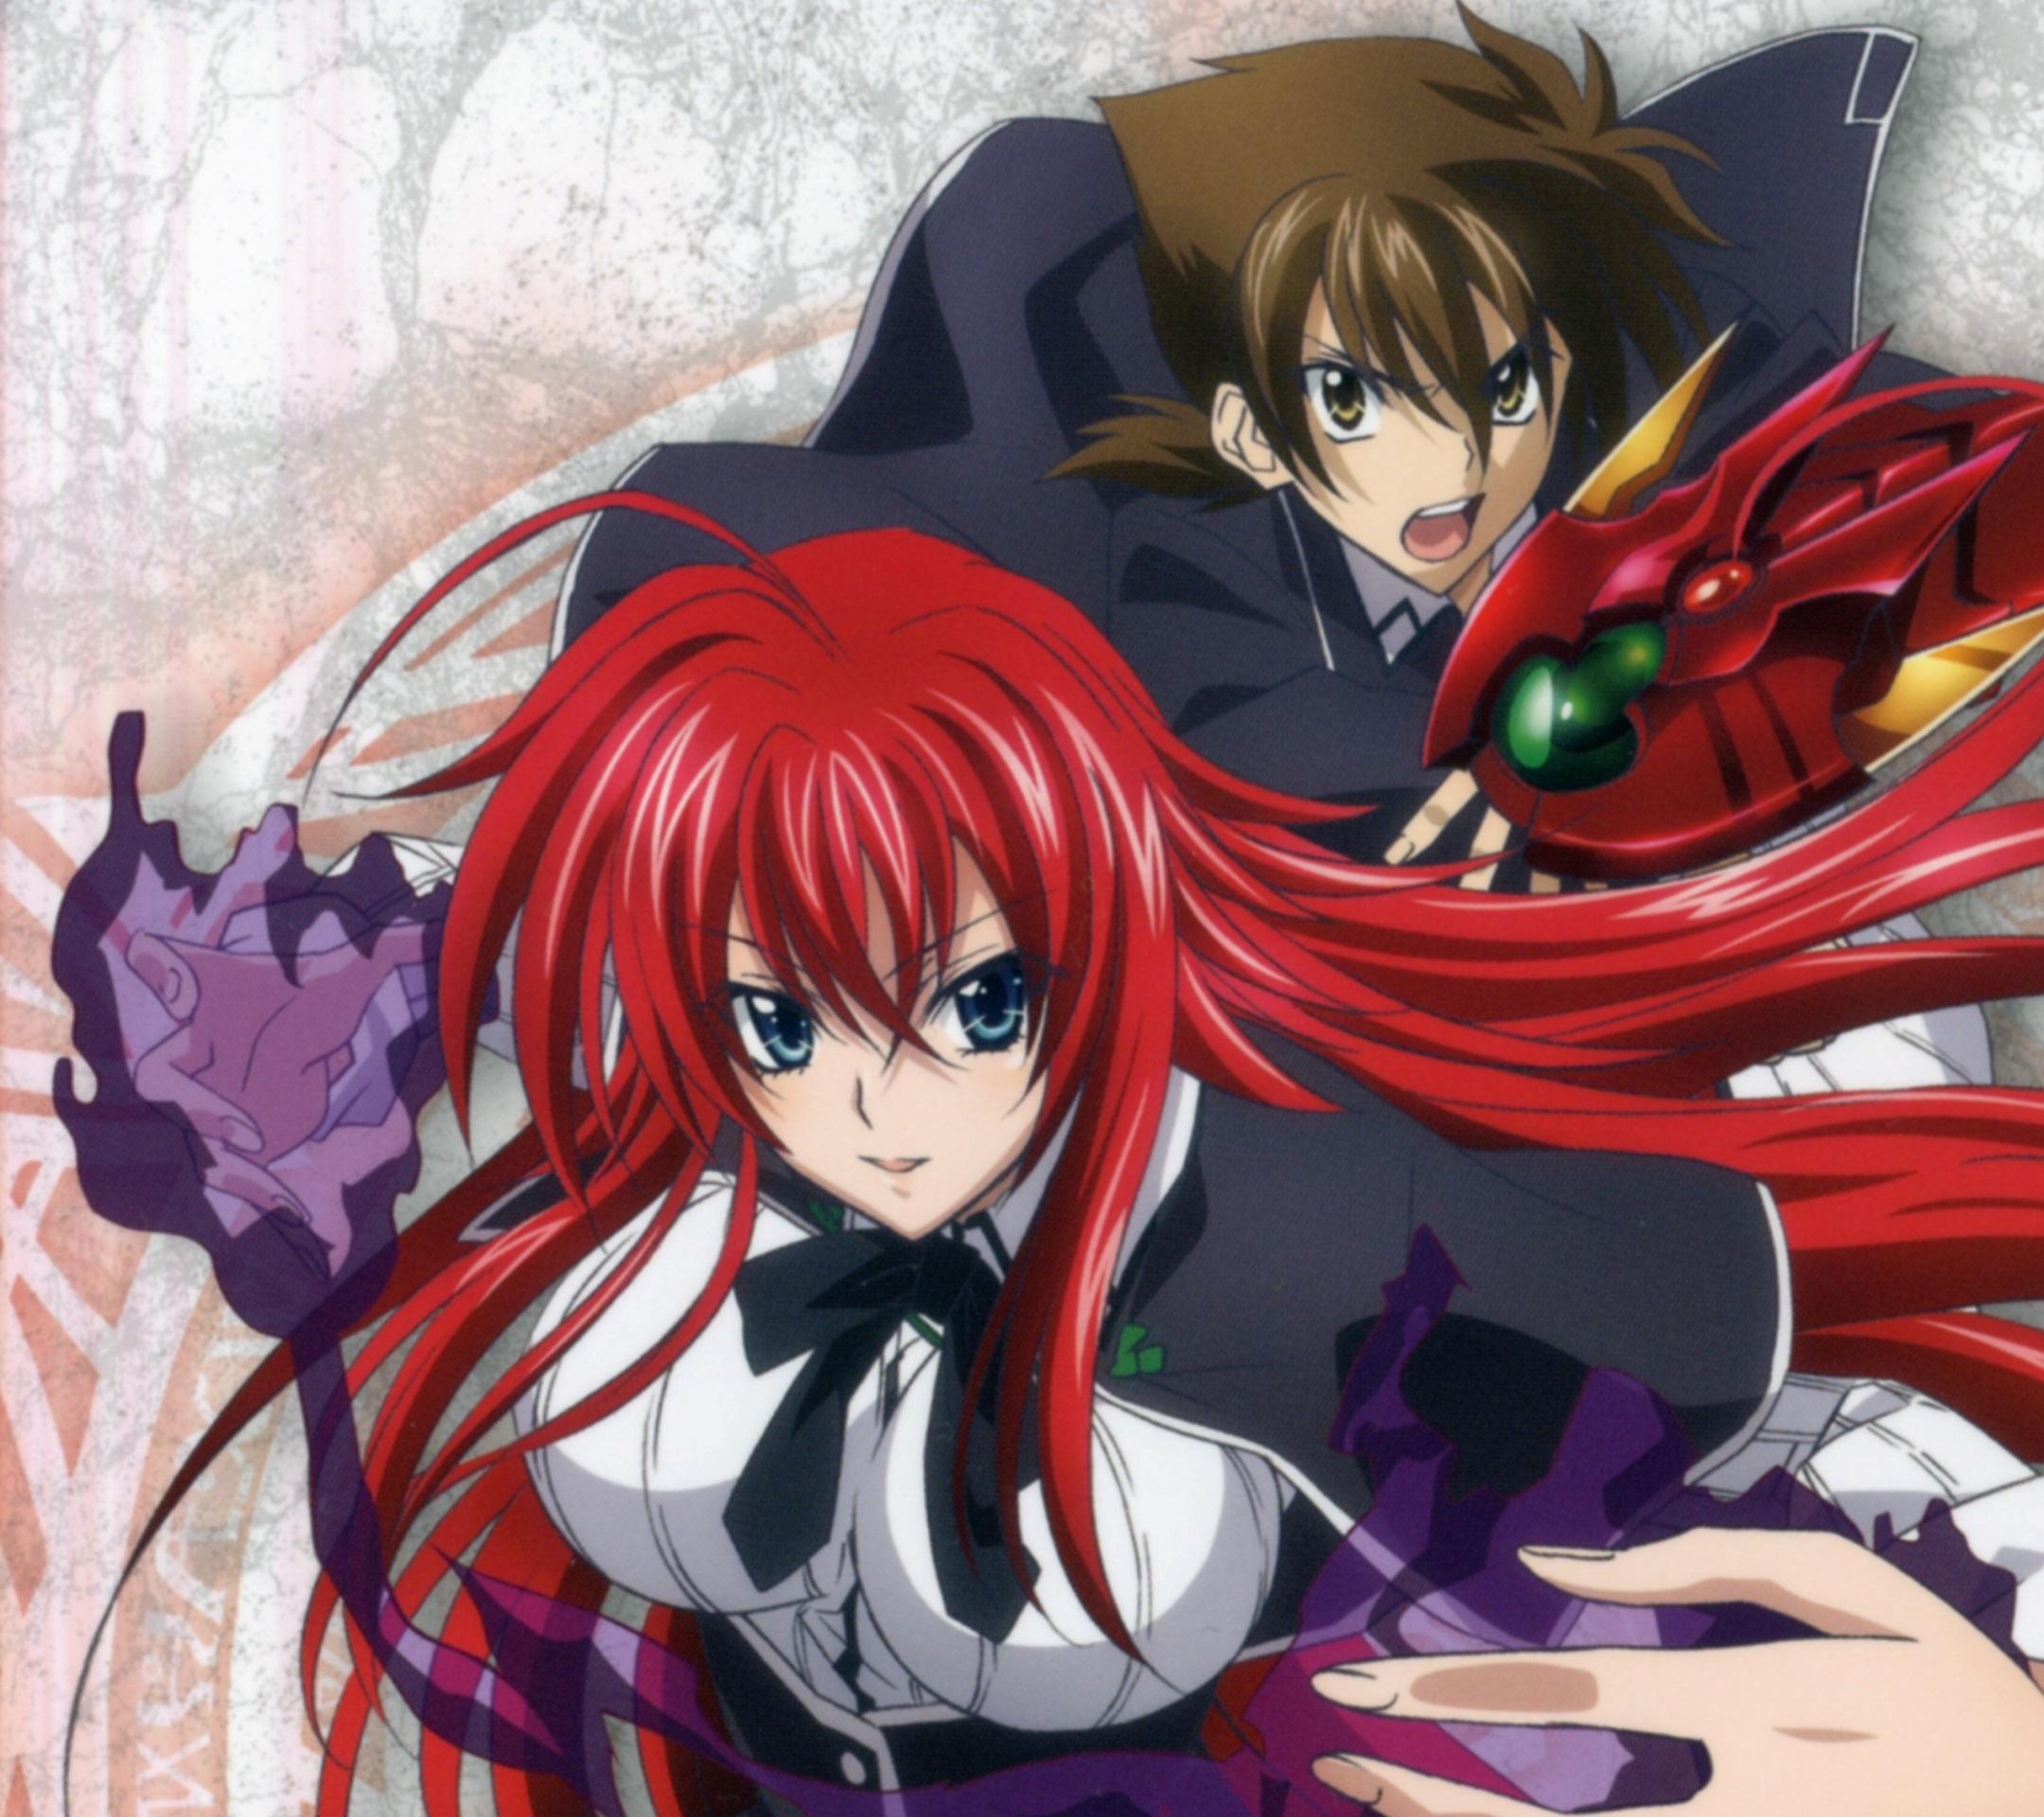 High School DxD NEW.Issei Hyodo Android wallpaper.Rias